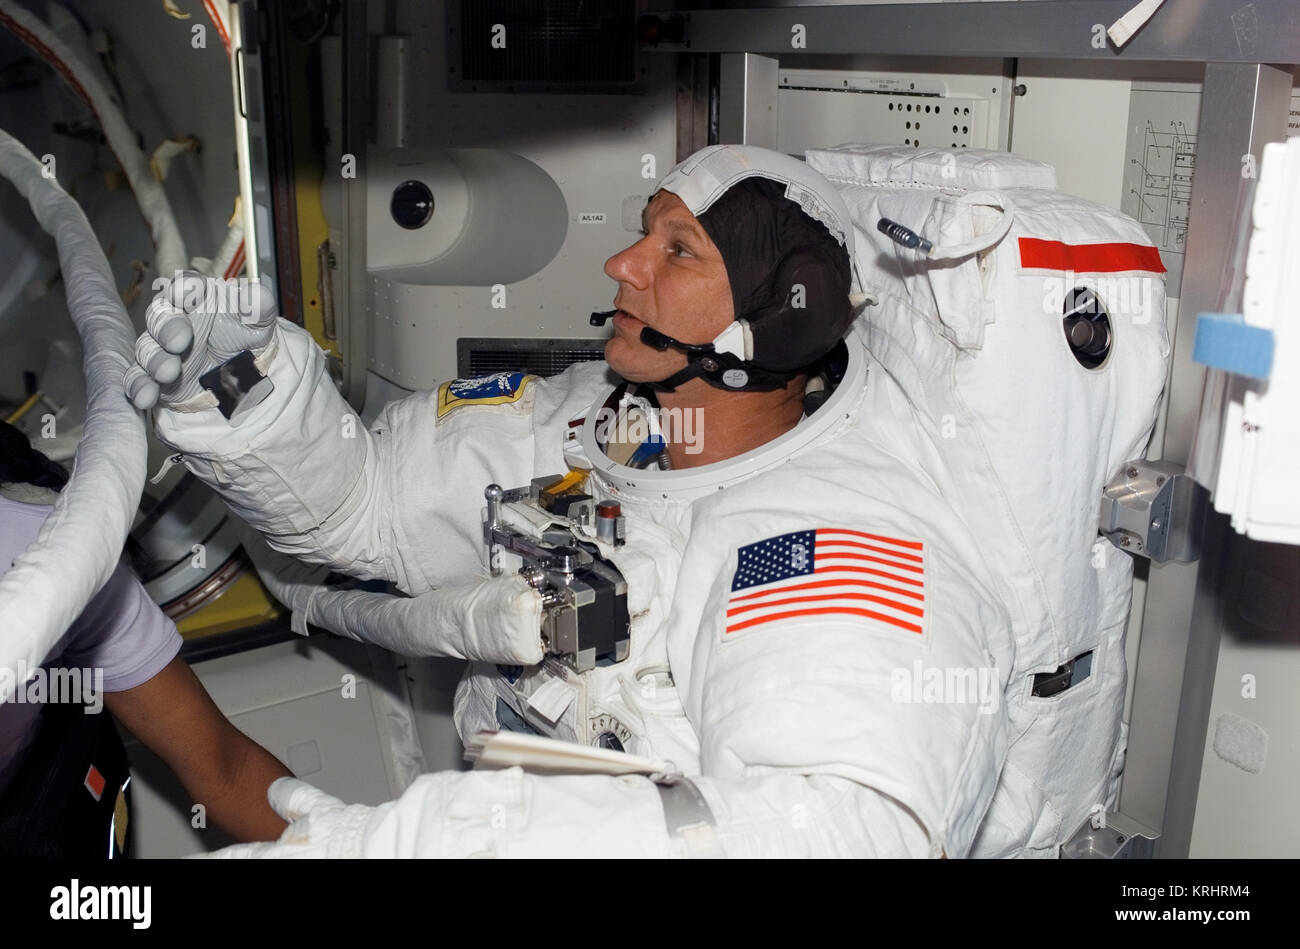 NASA Space Shuttle Discovery International Space Station STS-121 mission prime crew member American astronaut Piers Sellers prepares for an extravehicular activity spacewalk in the ISS Quest Airlock July 10, 2006 in Earth orbit. Stock Photo